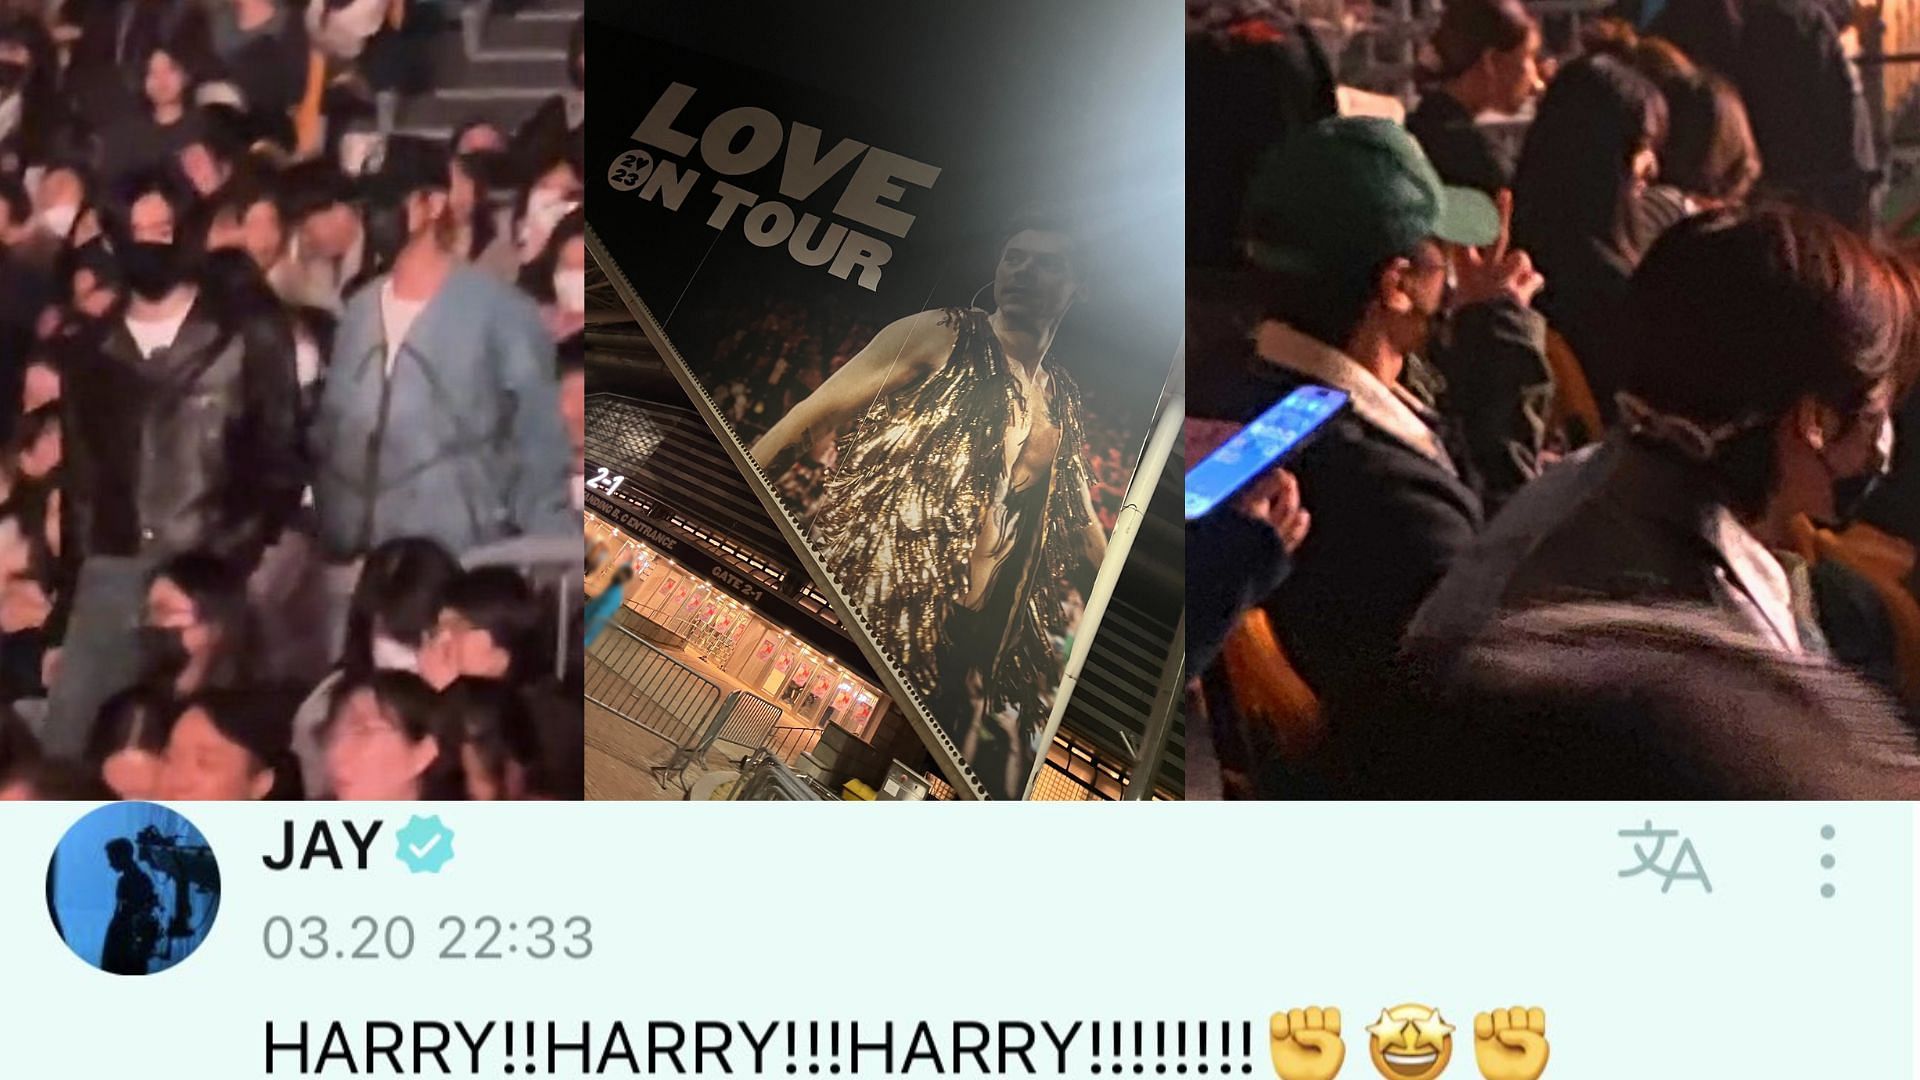 Members of fourth-gen K-pop idol group ENHYPEN, Jay, Jake, Sunghoon, and NI-KI were spotted by fans at the Seoul concert of Harry Styles. Jay is known to be a huge fan of the As It Was singer, and expressed his enthusiasm for his concert on Weverse. (Images via Twitter/ @Sunoo_Mylenxx, @hooniebaekgu, and @selvia_meyra1D )